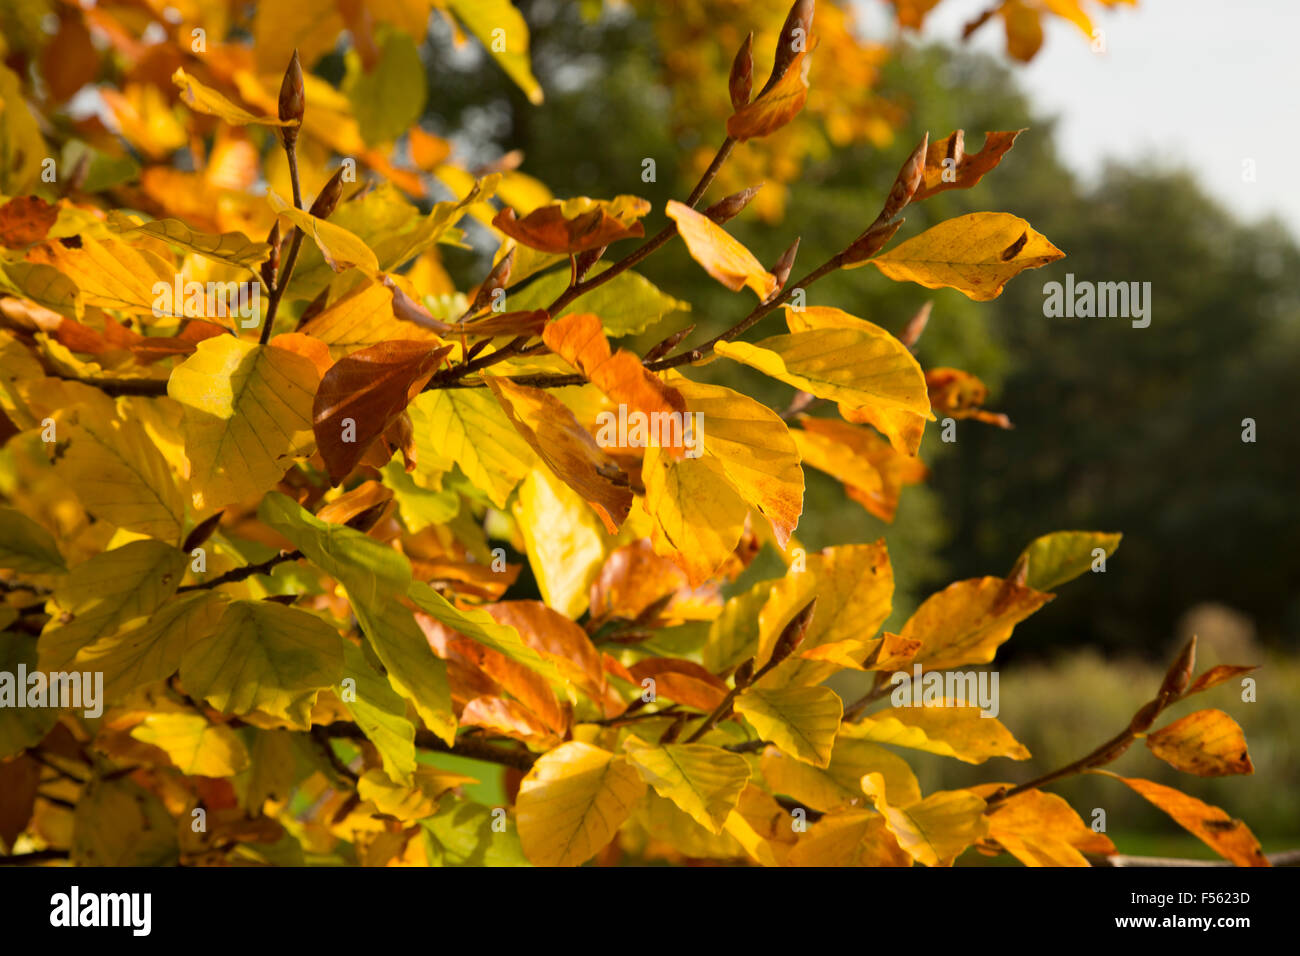 Beautiful autumn leaves in brown and yellows Stock Photo